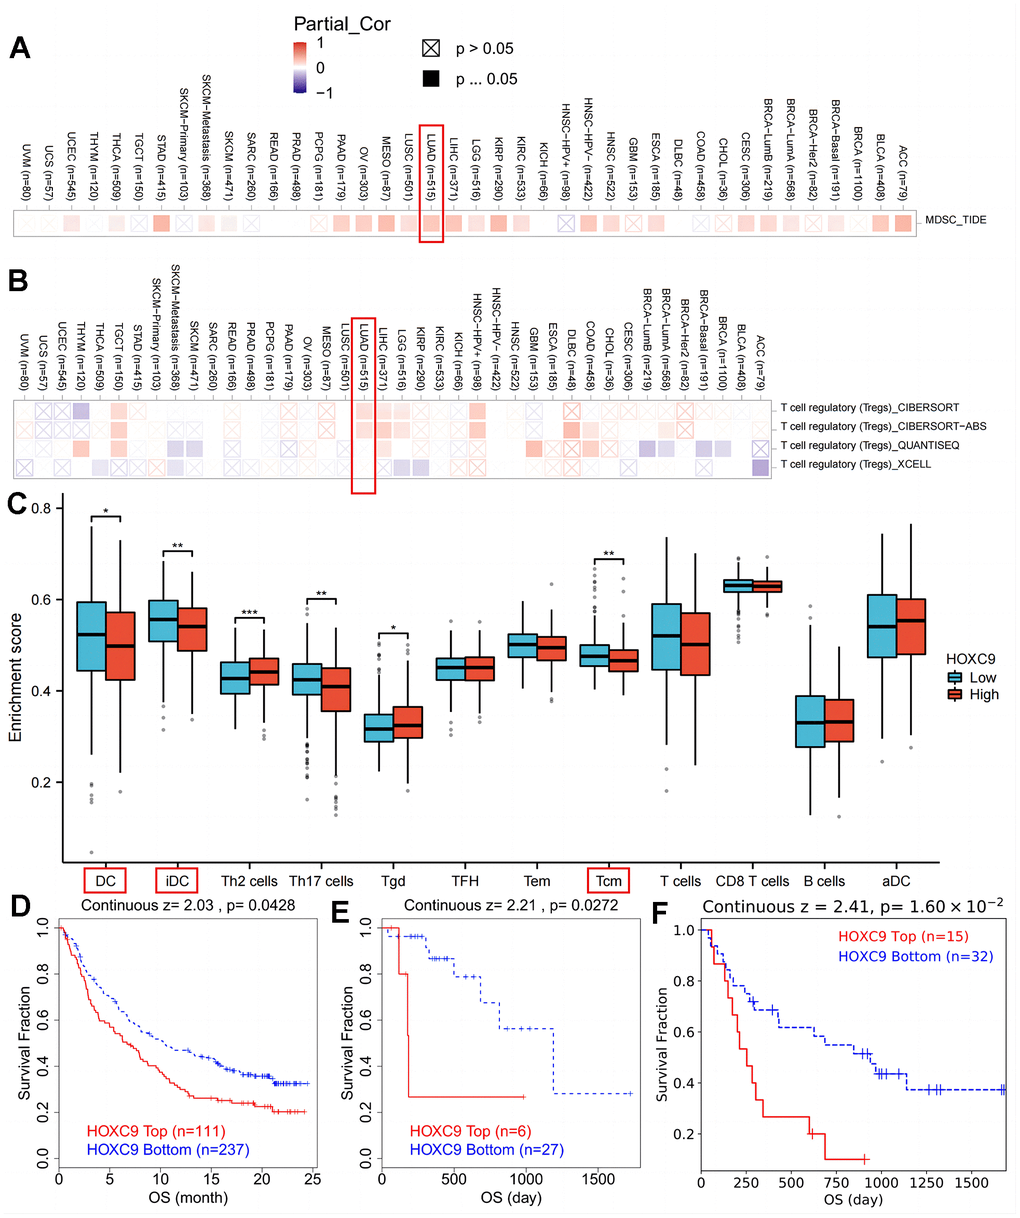 The correlation analysis between HOXC9 level and suppressive immune cells among cancers. (A) HOXC9 was significantly related to MDSC in LUAD. (B) HOXC9 was significantly related to Tregs in LUAD. (C) patients with high HOXC9 possessing lower DC and Tcm infiltrations. (D) HOXC9 expression was related to shorter OS of bladder cancer. (E) kidney cancer. and (F) melanoma treated with ICIs. (*P